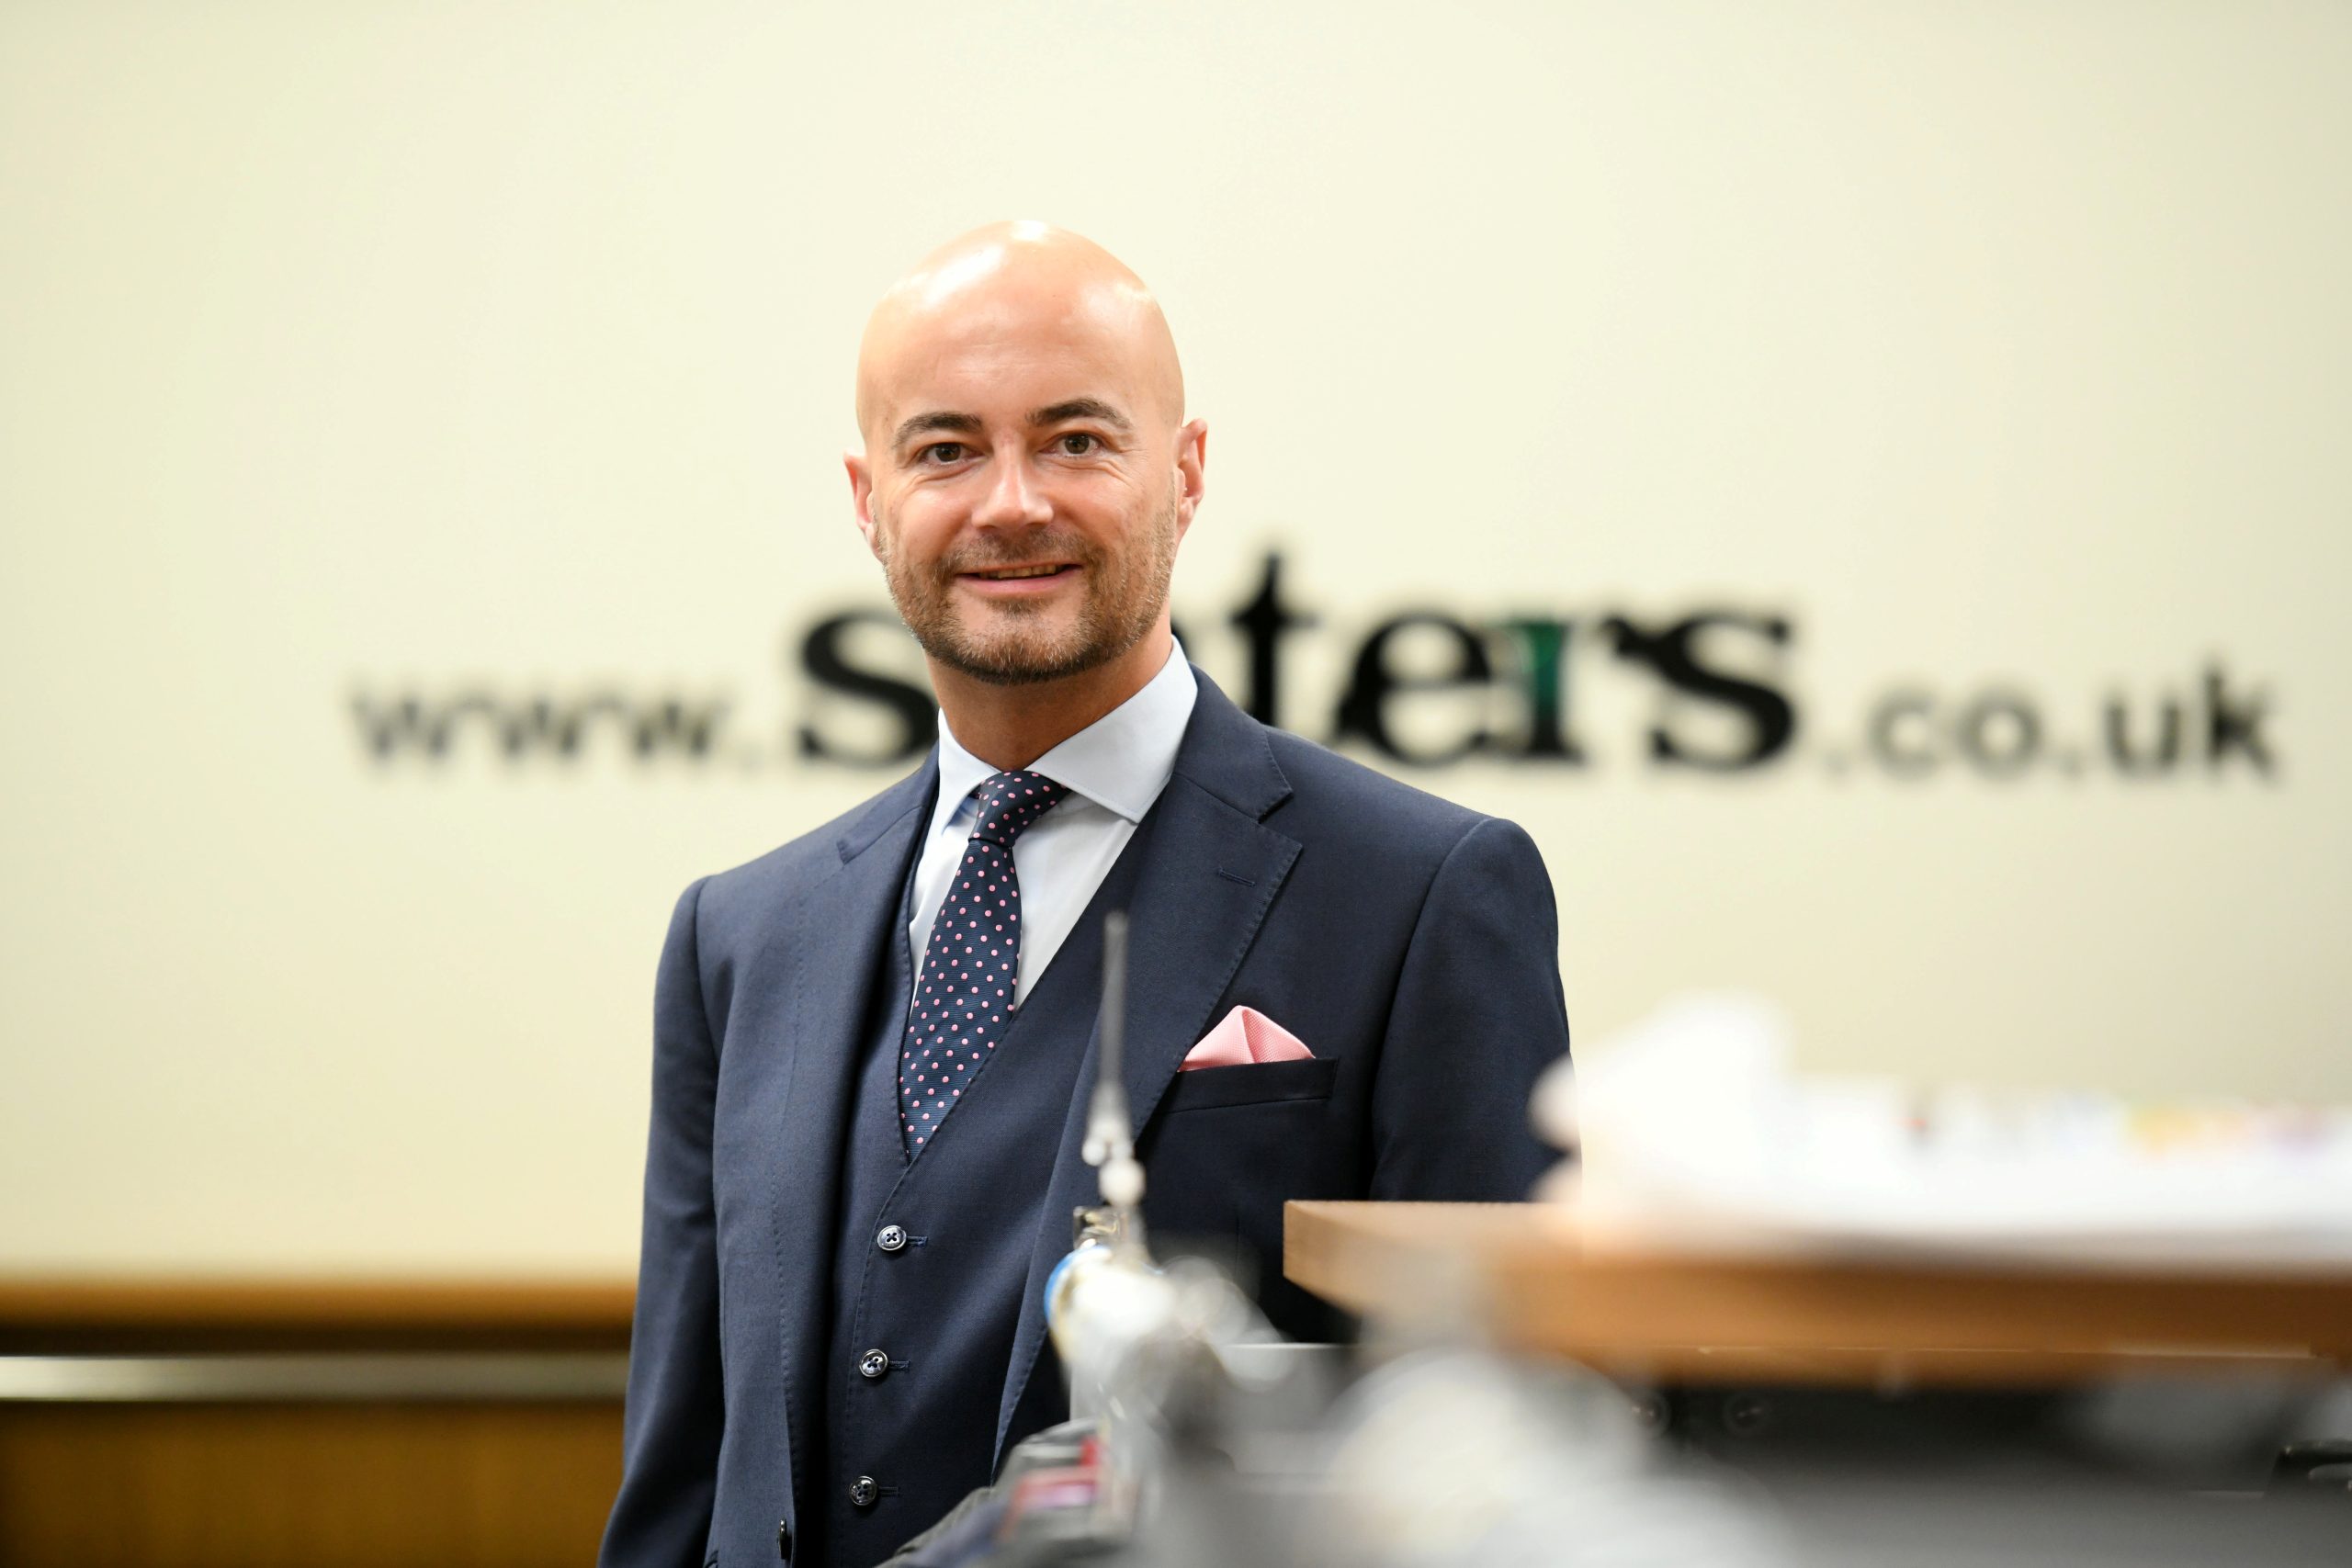 Person Behind the Business featuring Andrew Fraser of Slaters